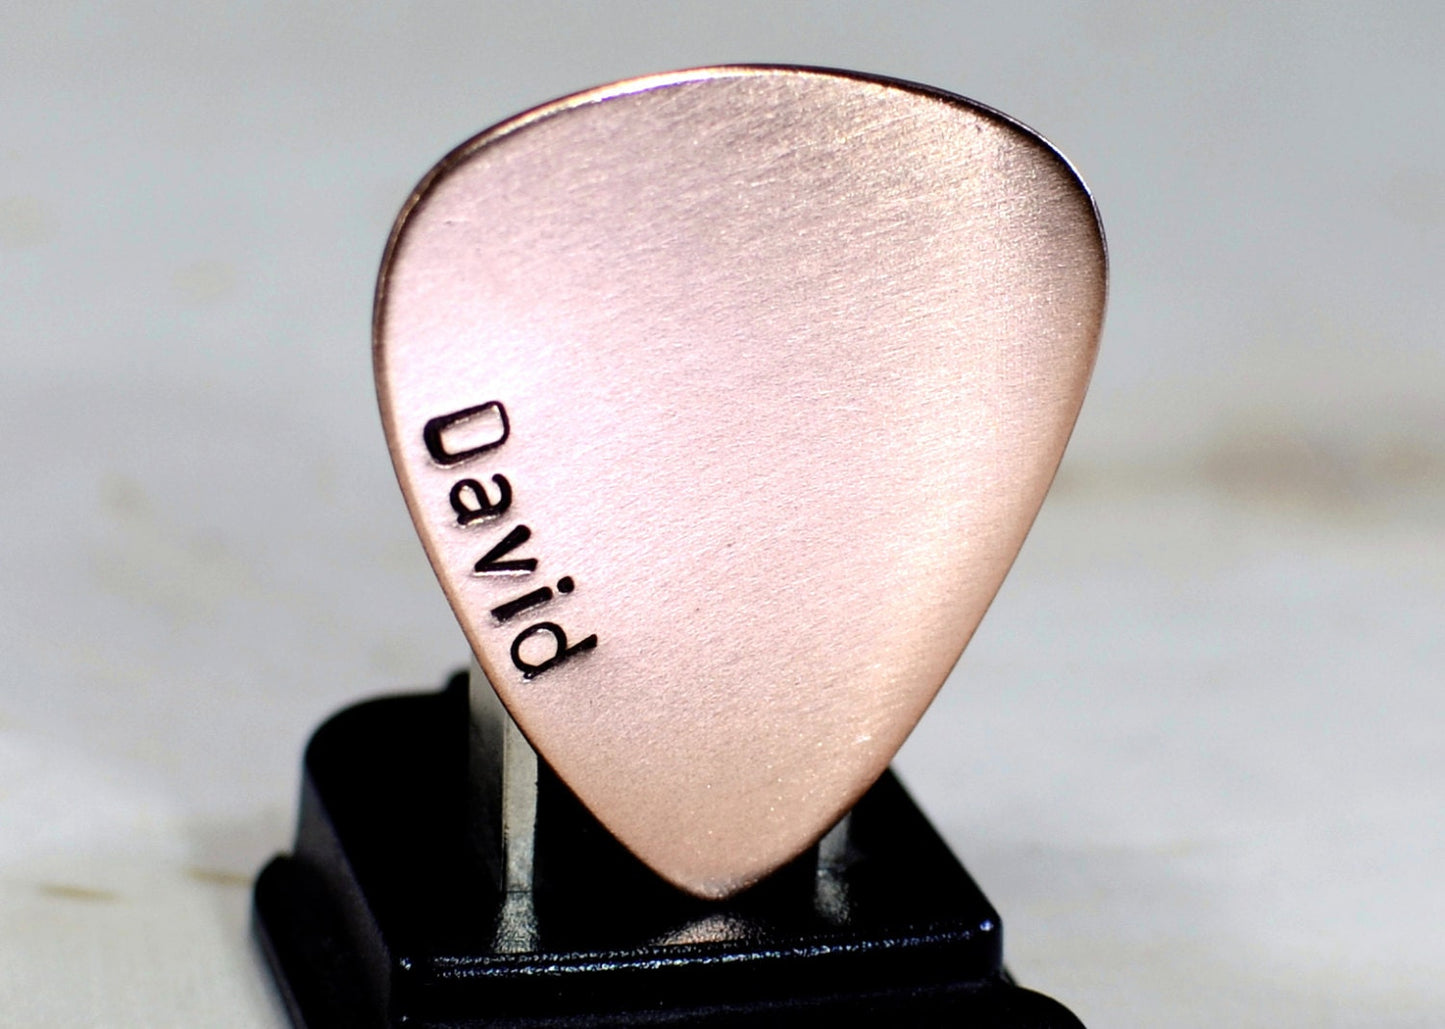 Personalized Copper Guitar Pick with Name Down the Side - perfect little gift that is usable - playable copper plectrum - custom gift